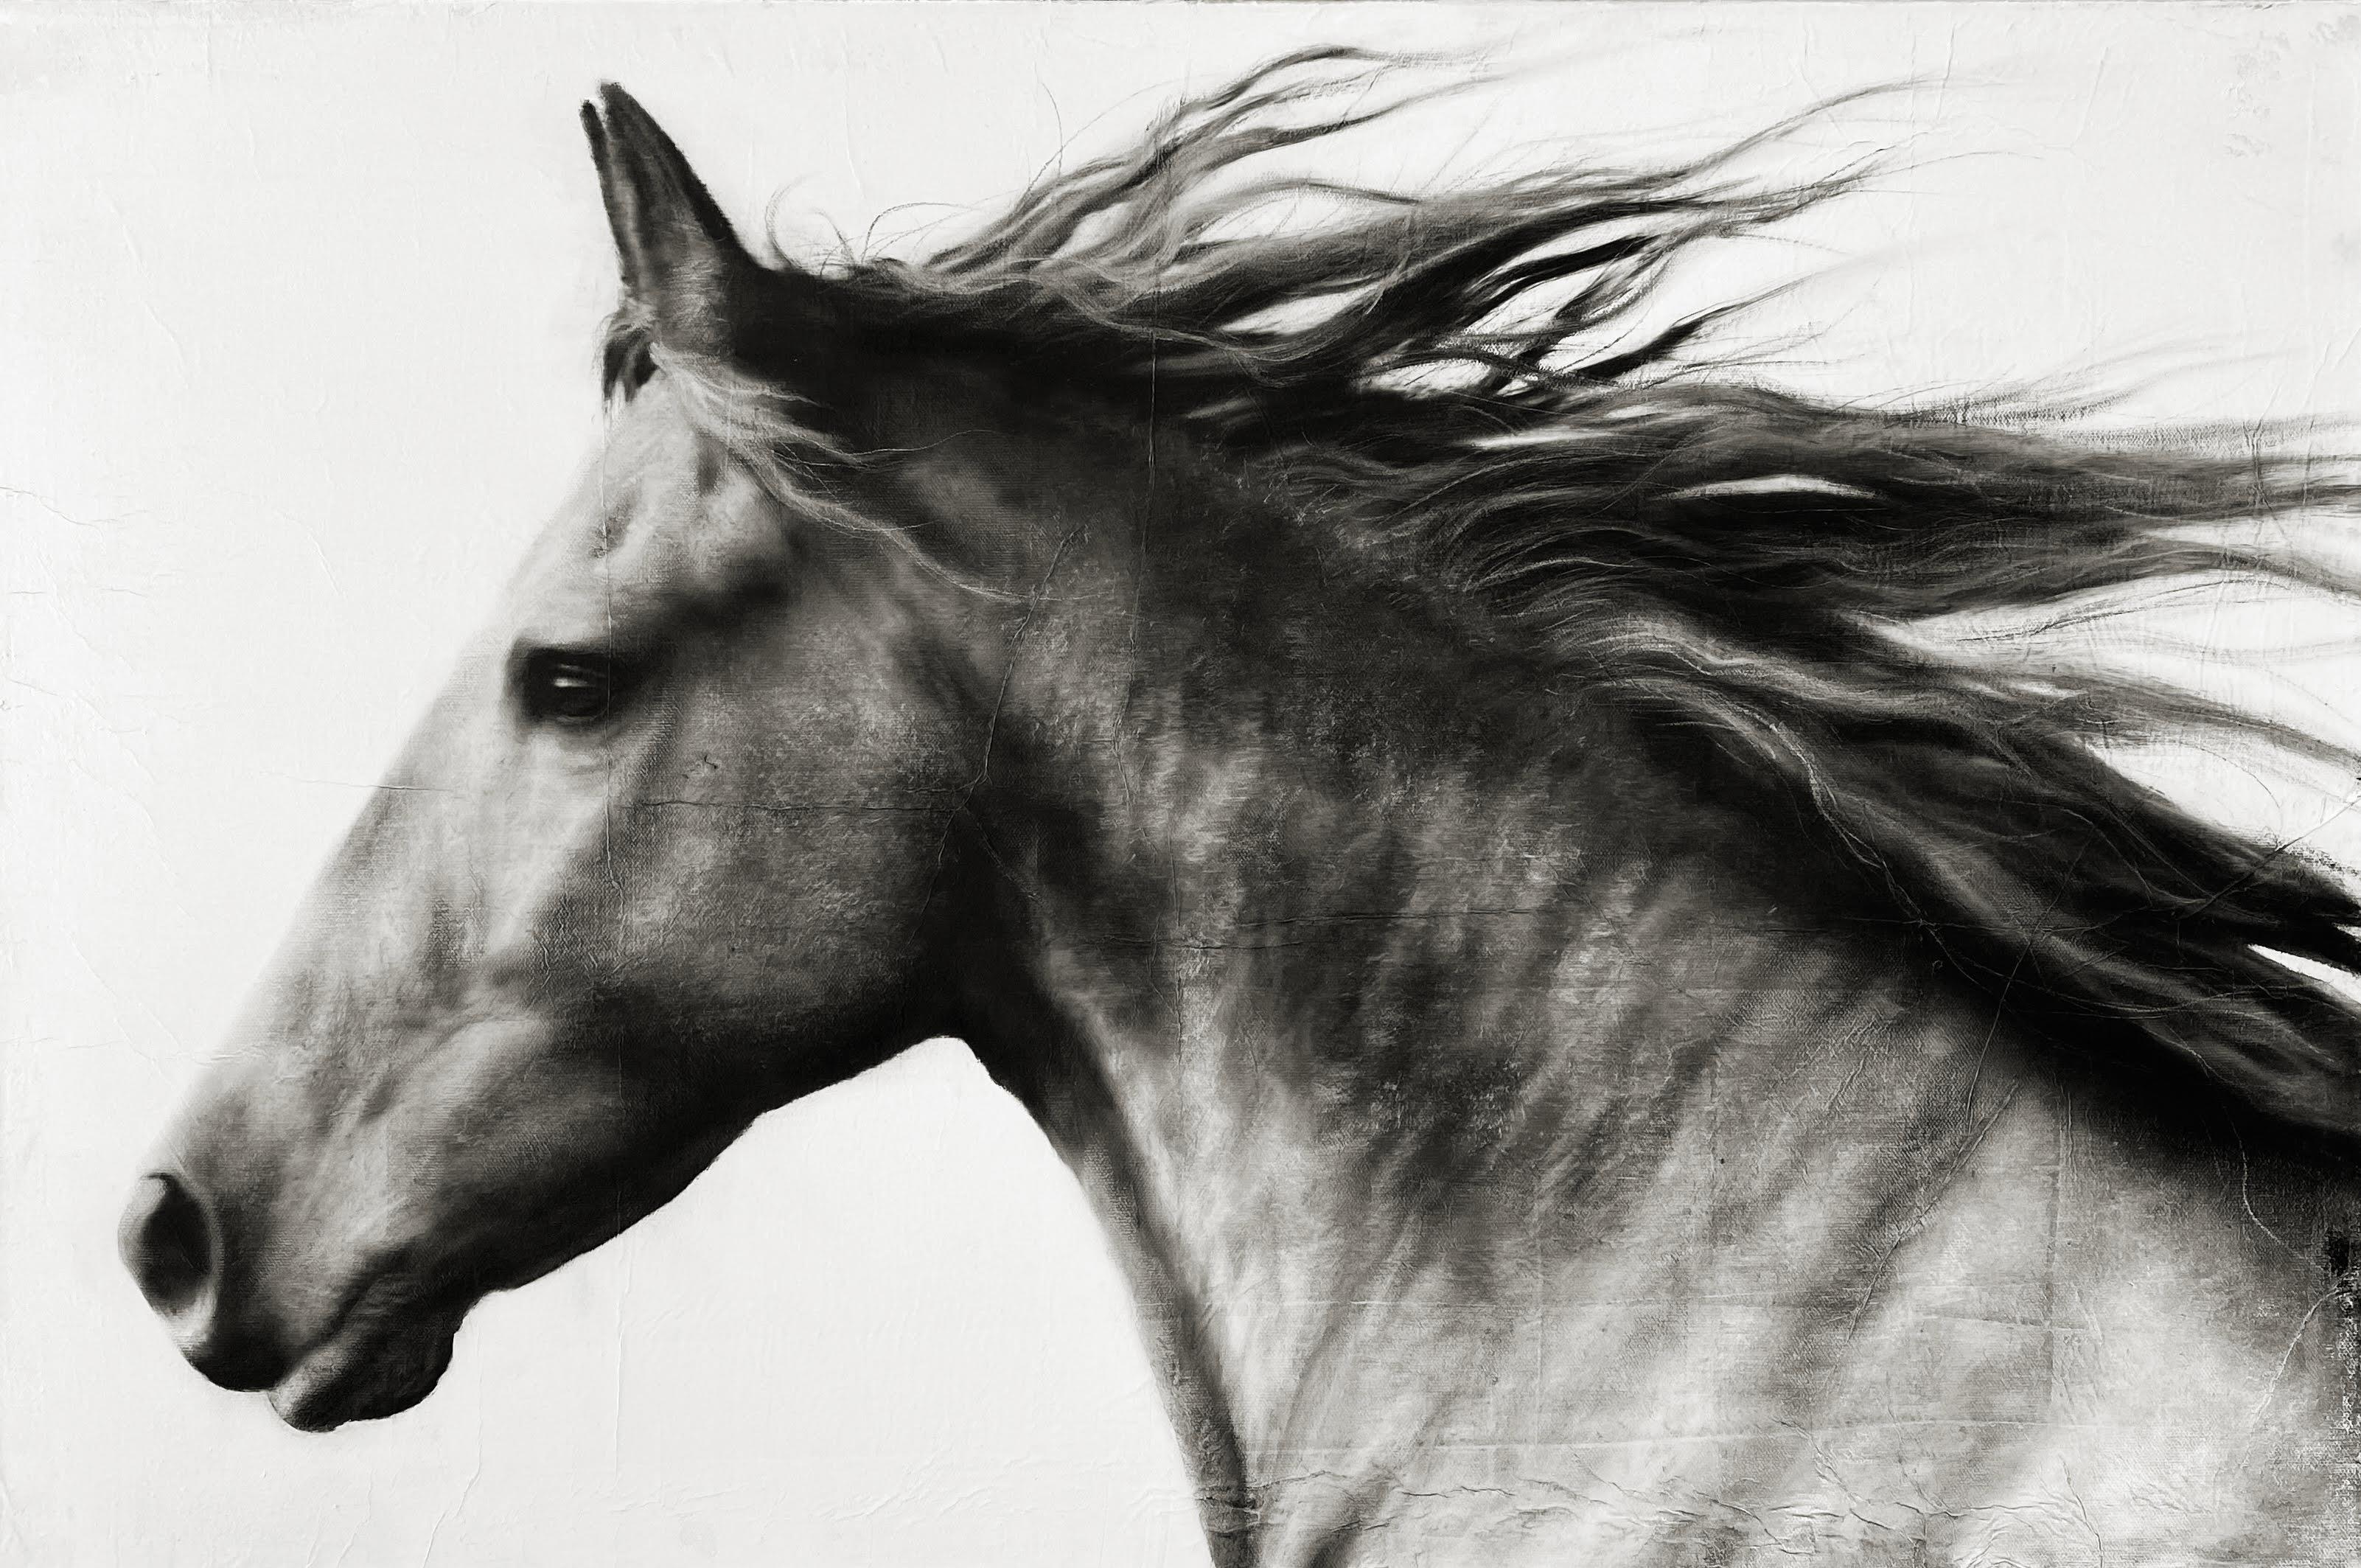 KENNETH PELOKE Animal Painting - "Untitled" photorealistic oil painting of a horse head in black and white